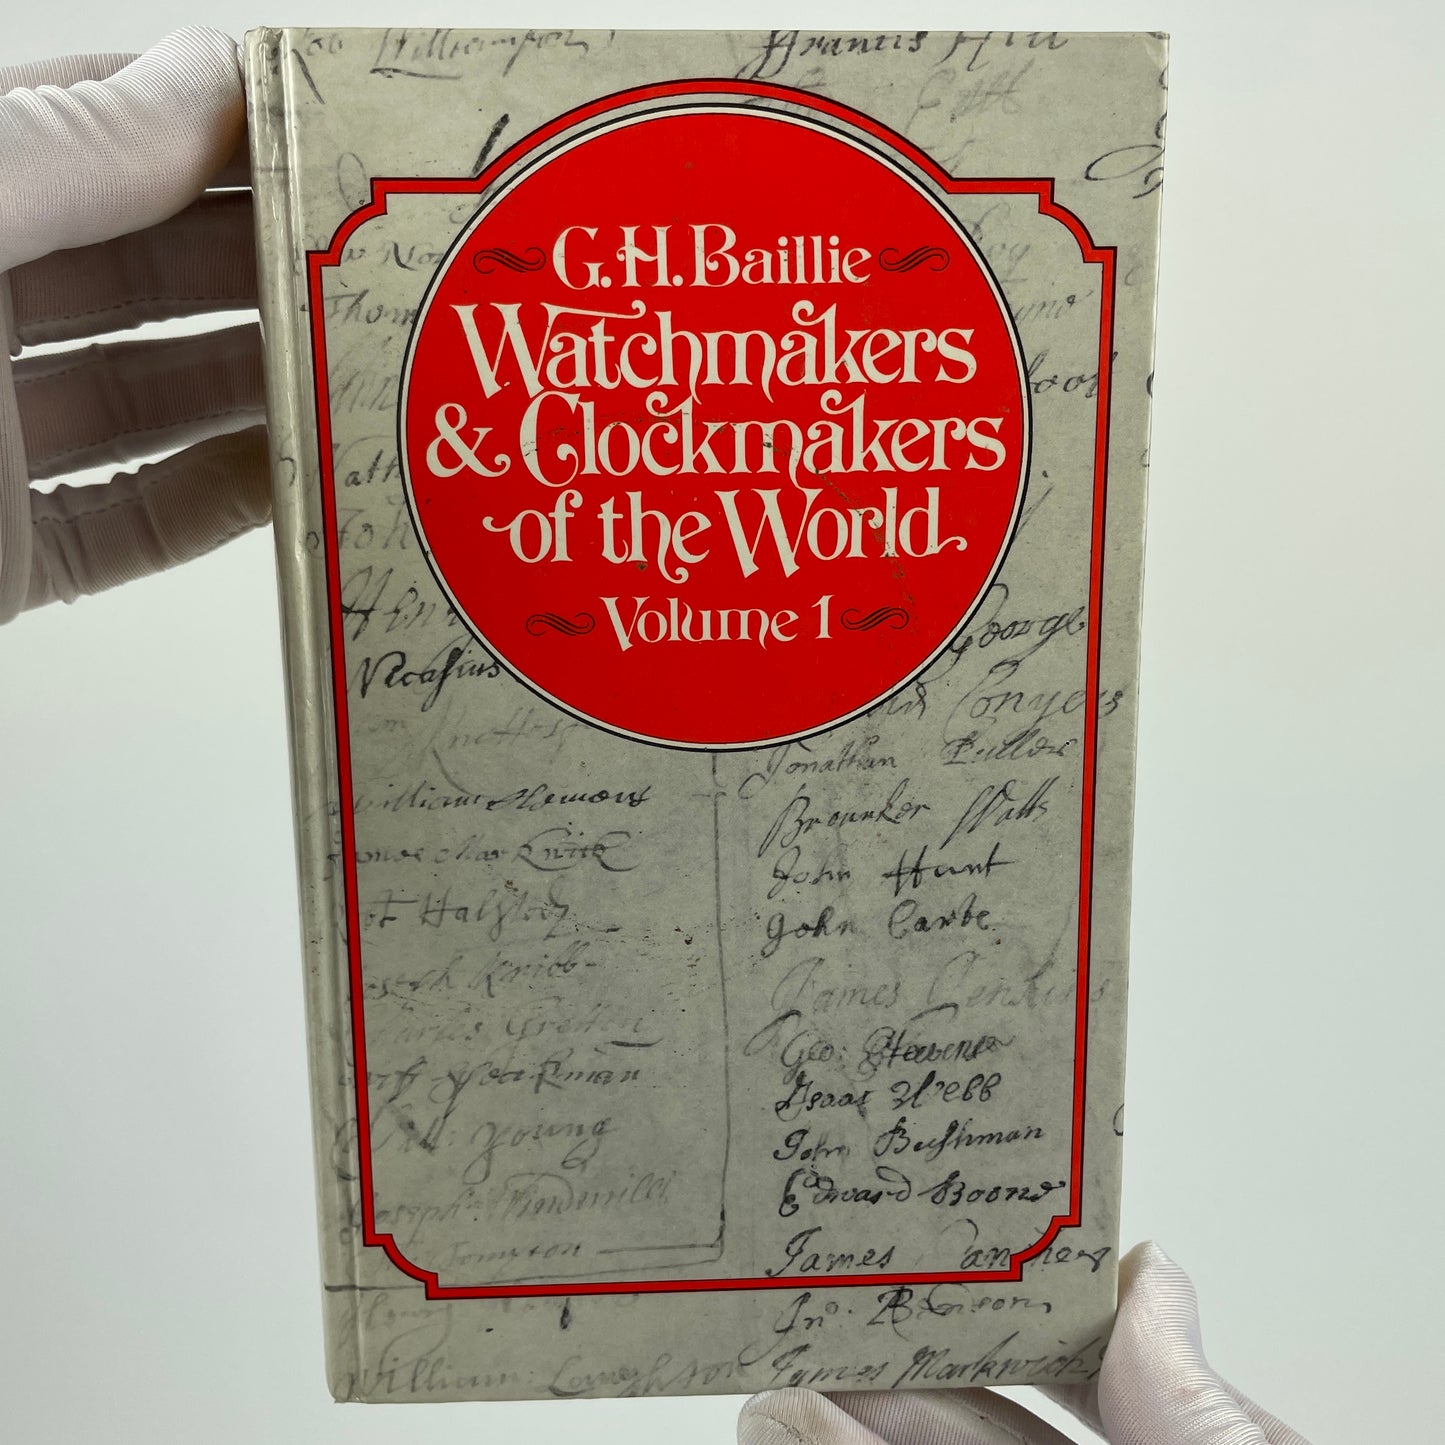 Nov Lot 22- Watchmakers & Clockmakers of the World Vol. 1